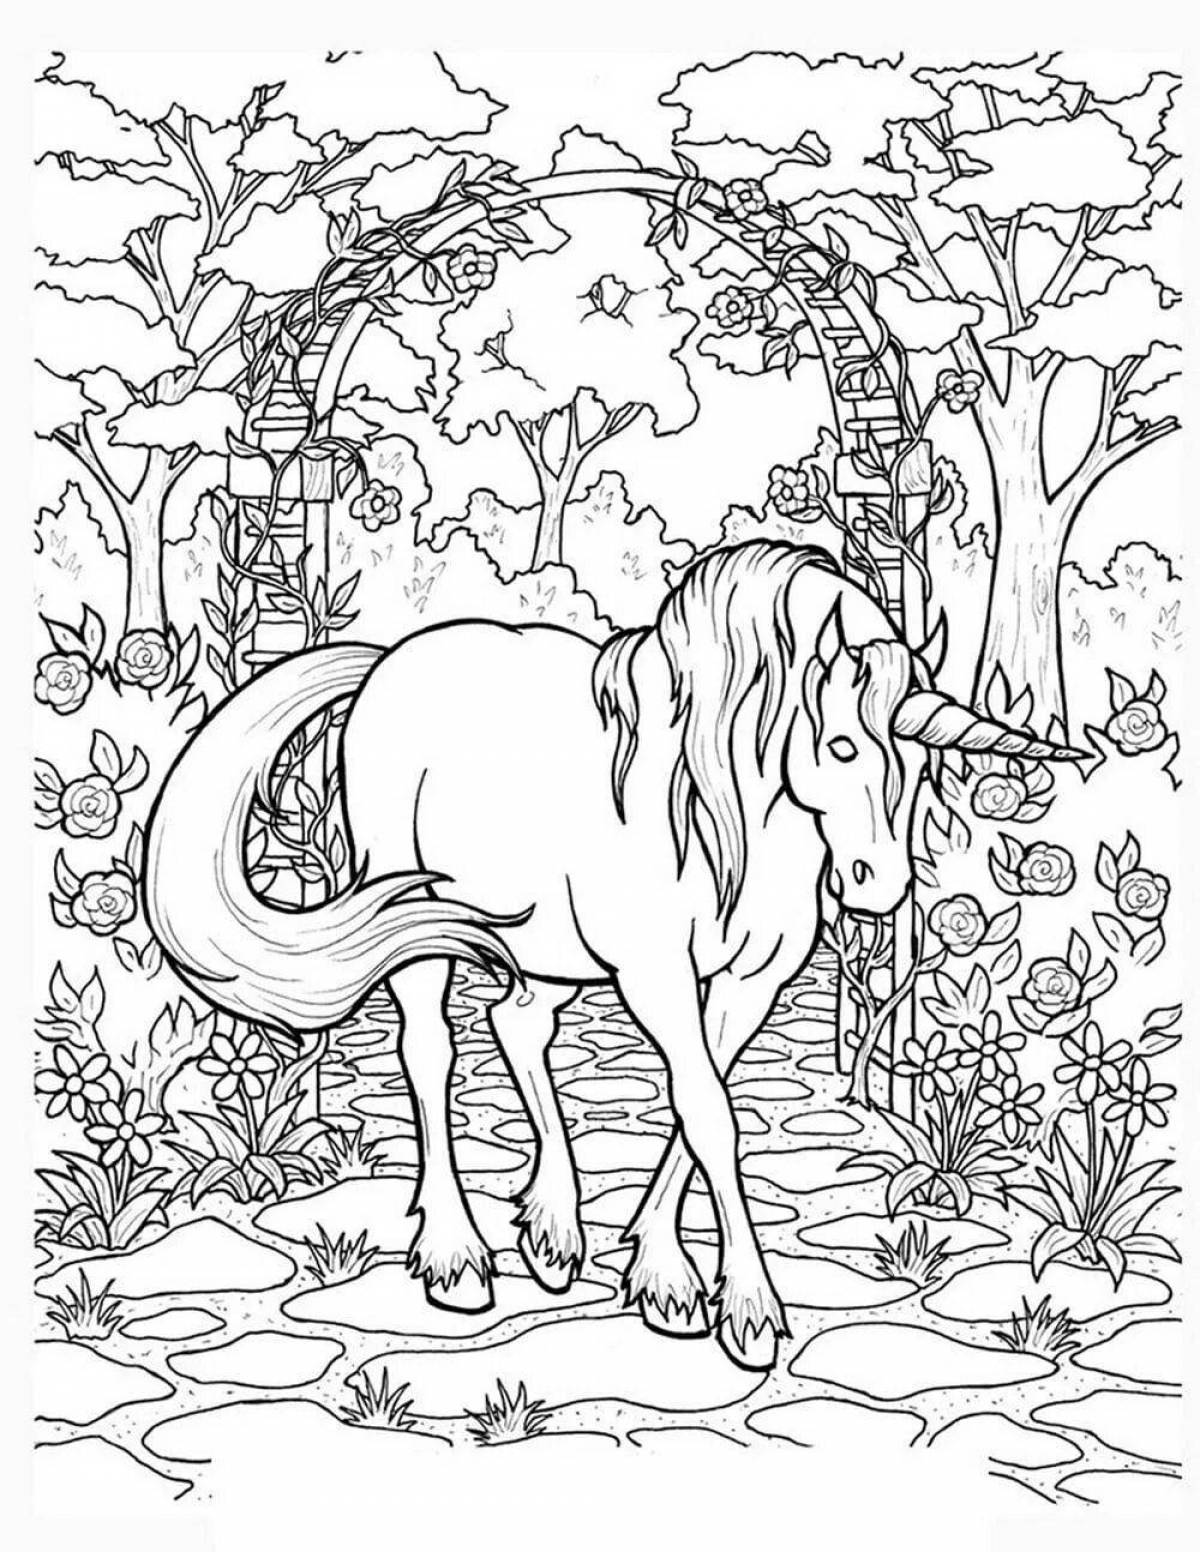 Playful 10 year old animal coloring pages